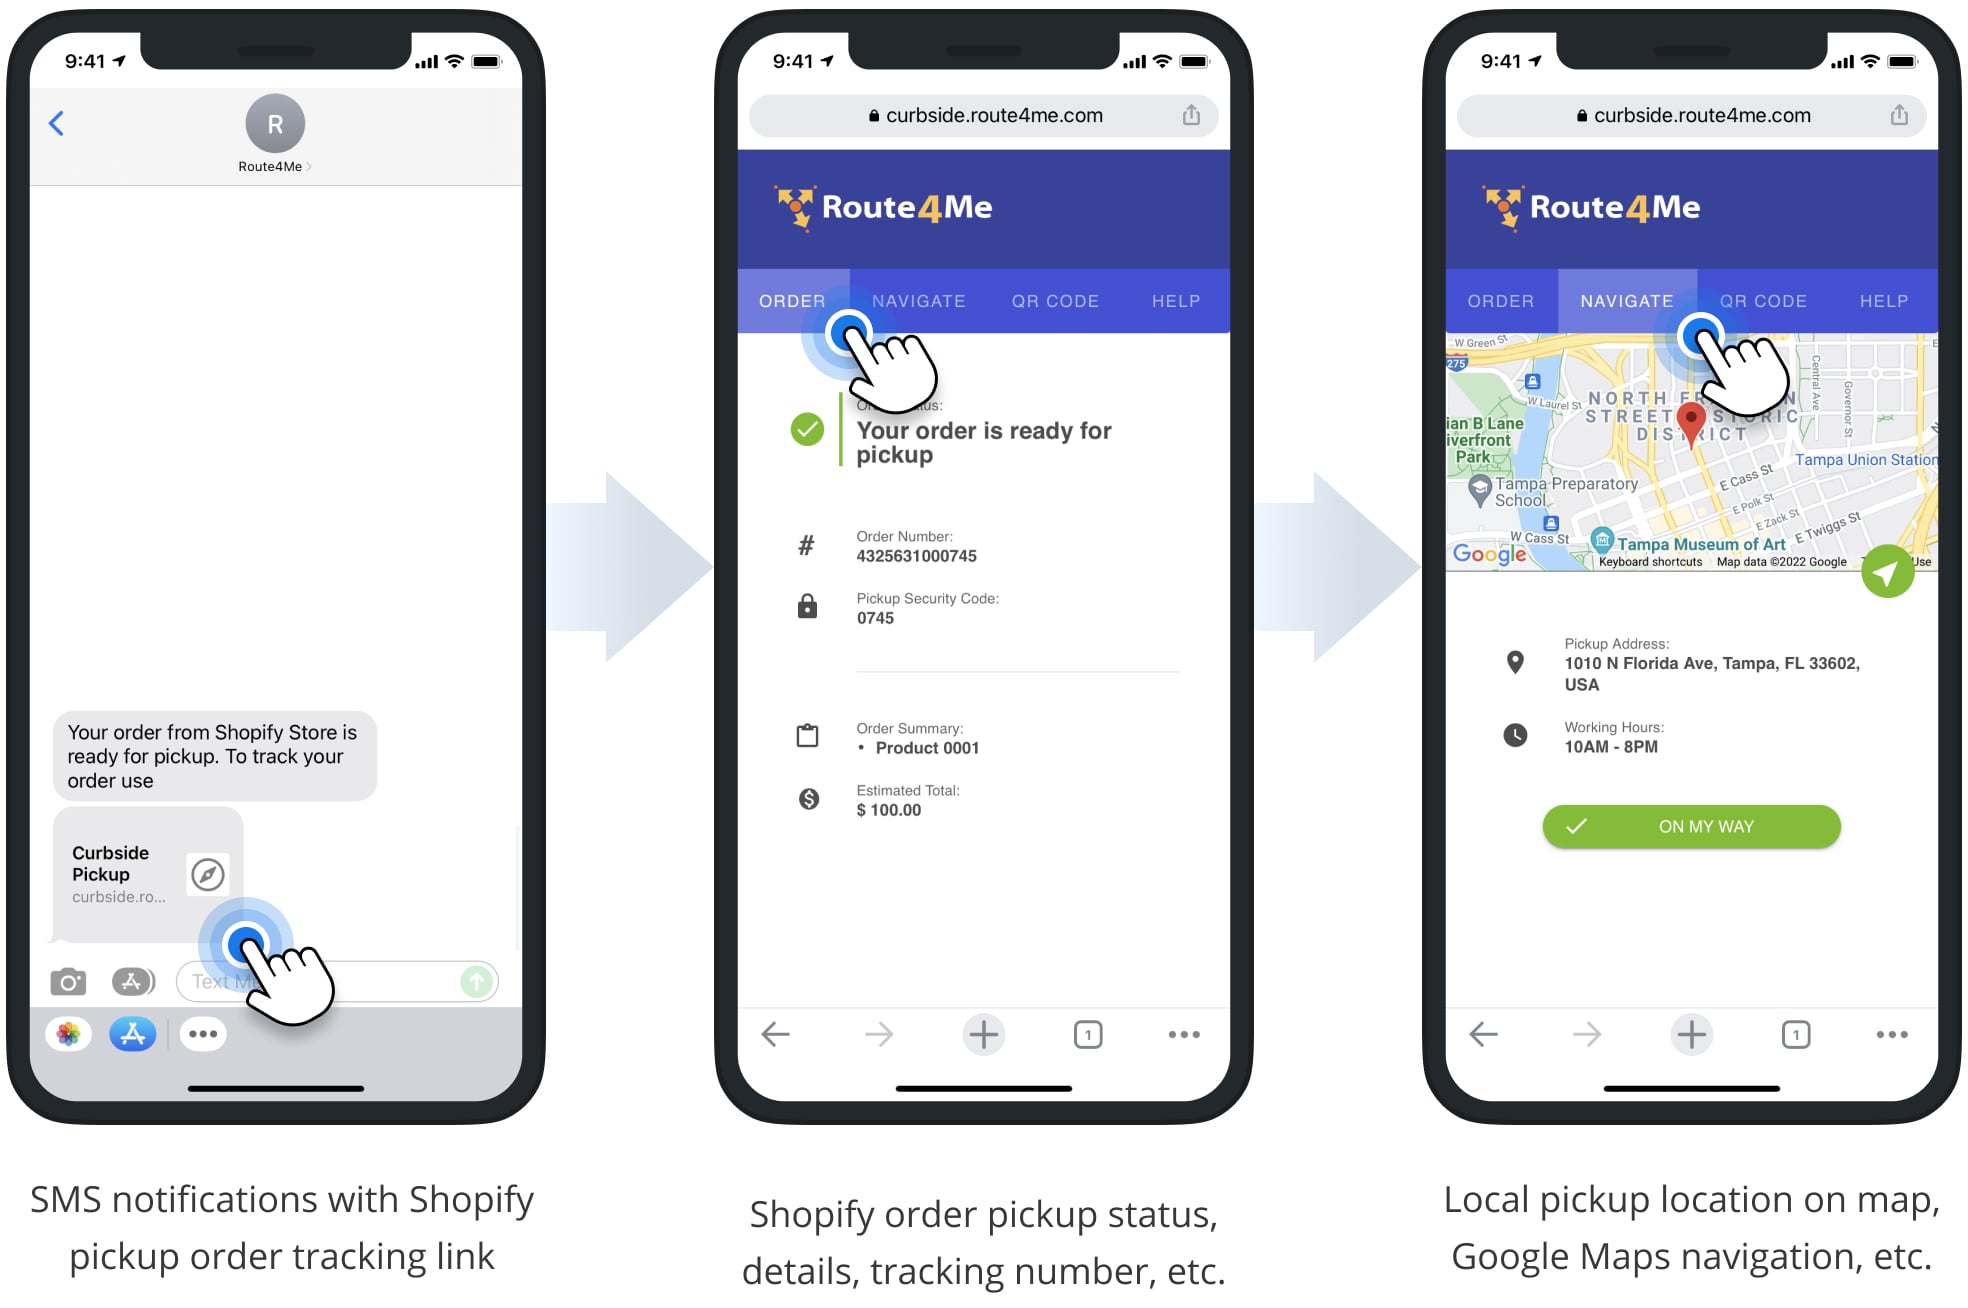 Shopify curbside pickup SMS notifications can include order pickup tracking link with the order number, store location, and more.